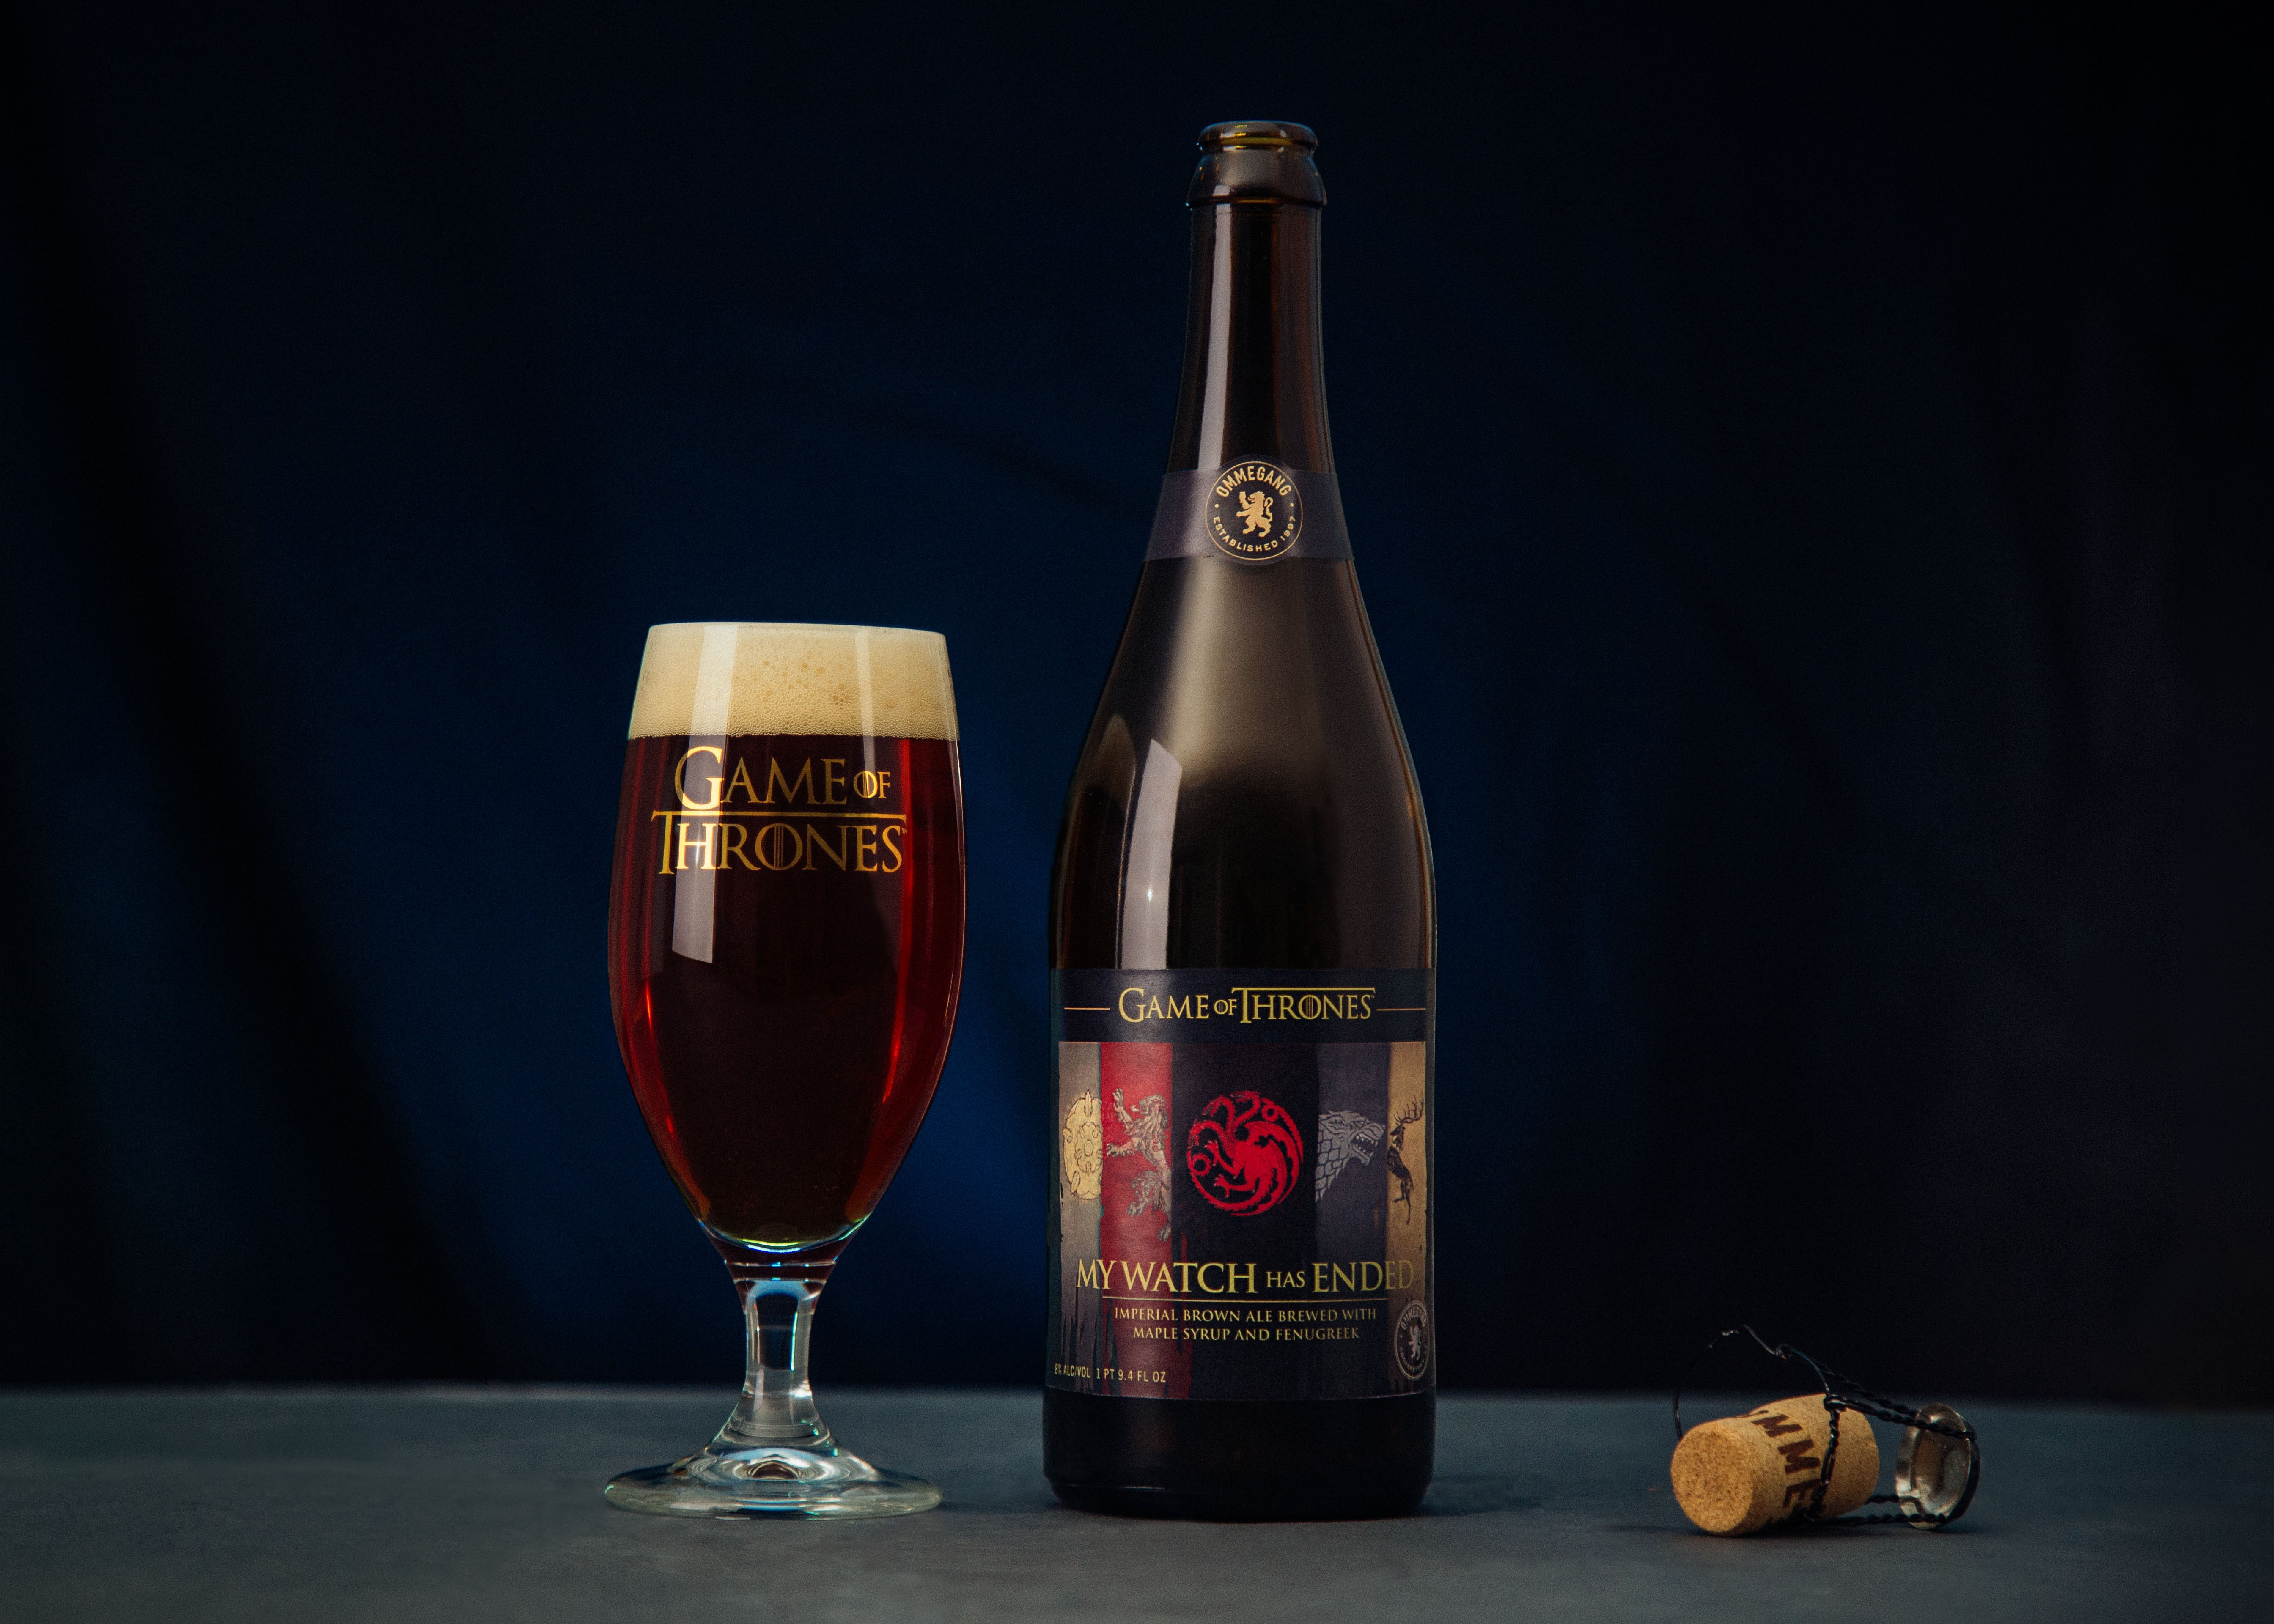 Buy Ommegang Game of Thrones My Watch Has Ended Online -Craft City